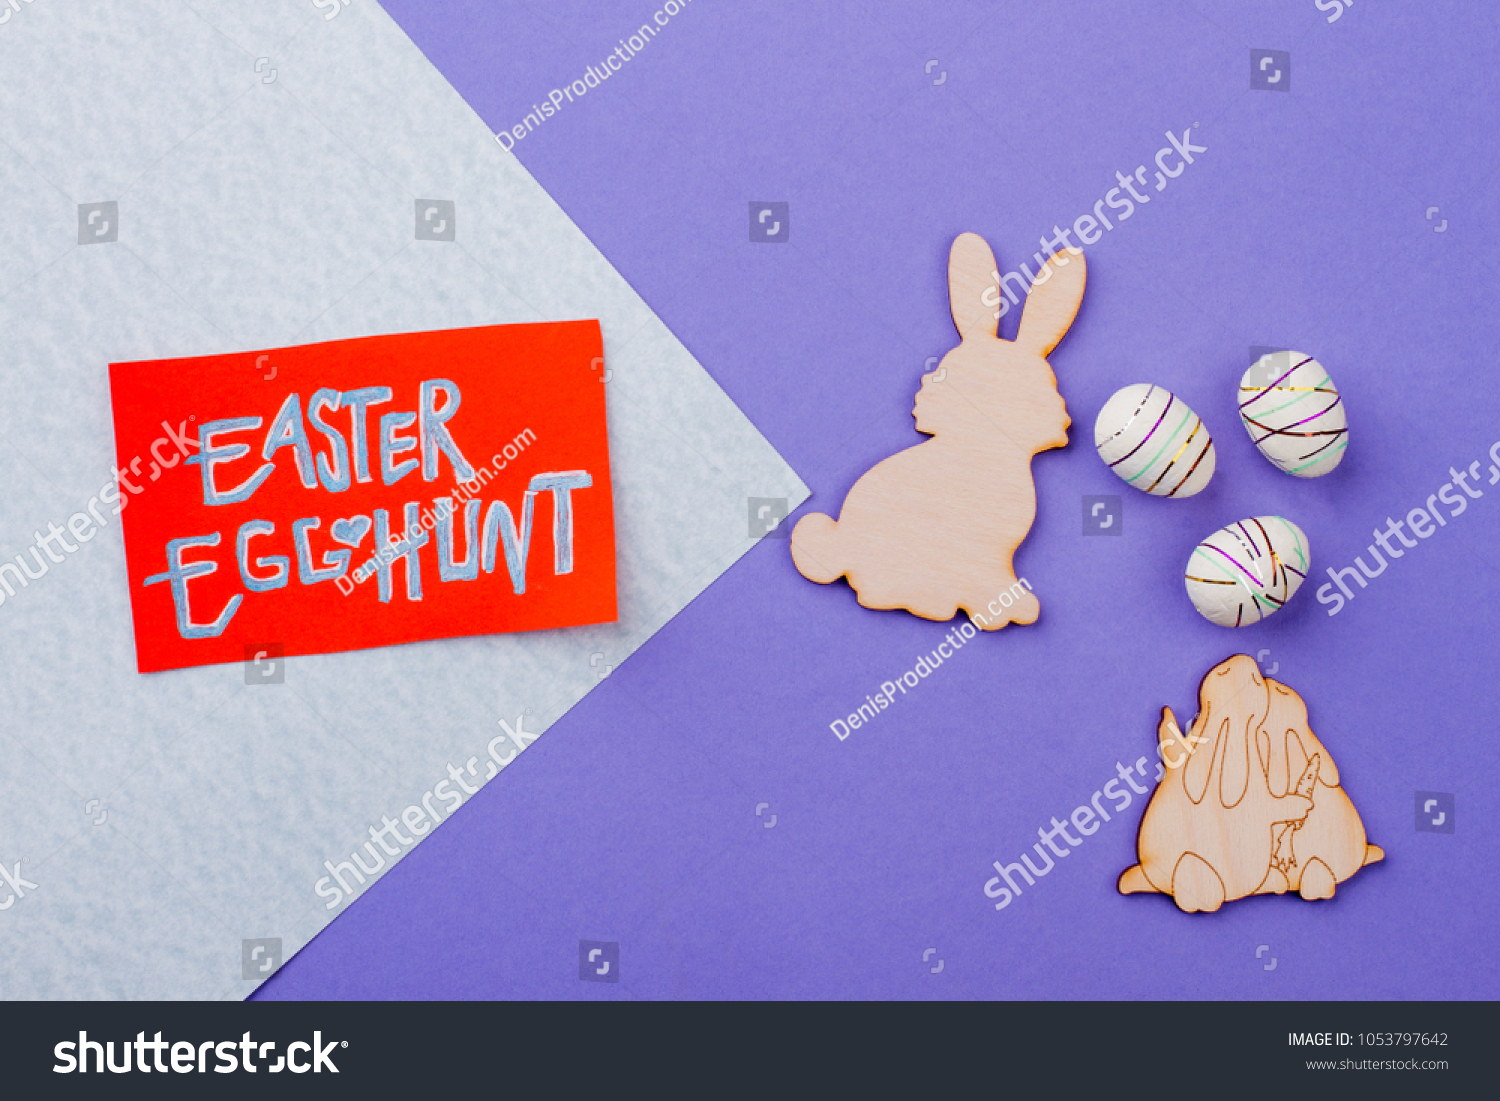 Easter egg hunt text. Easter card, plywood rabbit cutouts and styrofoam eggs. Easter egg hunt ideas. #1053797642